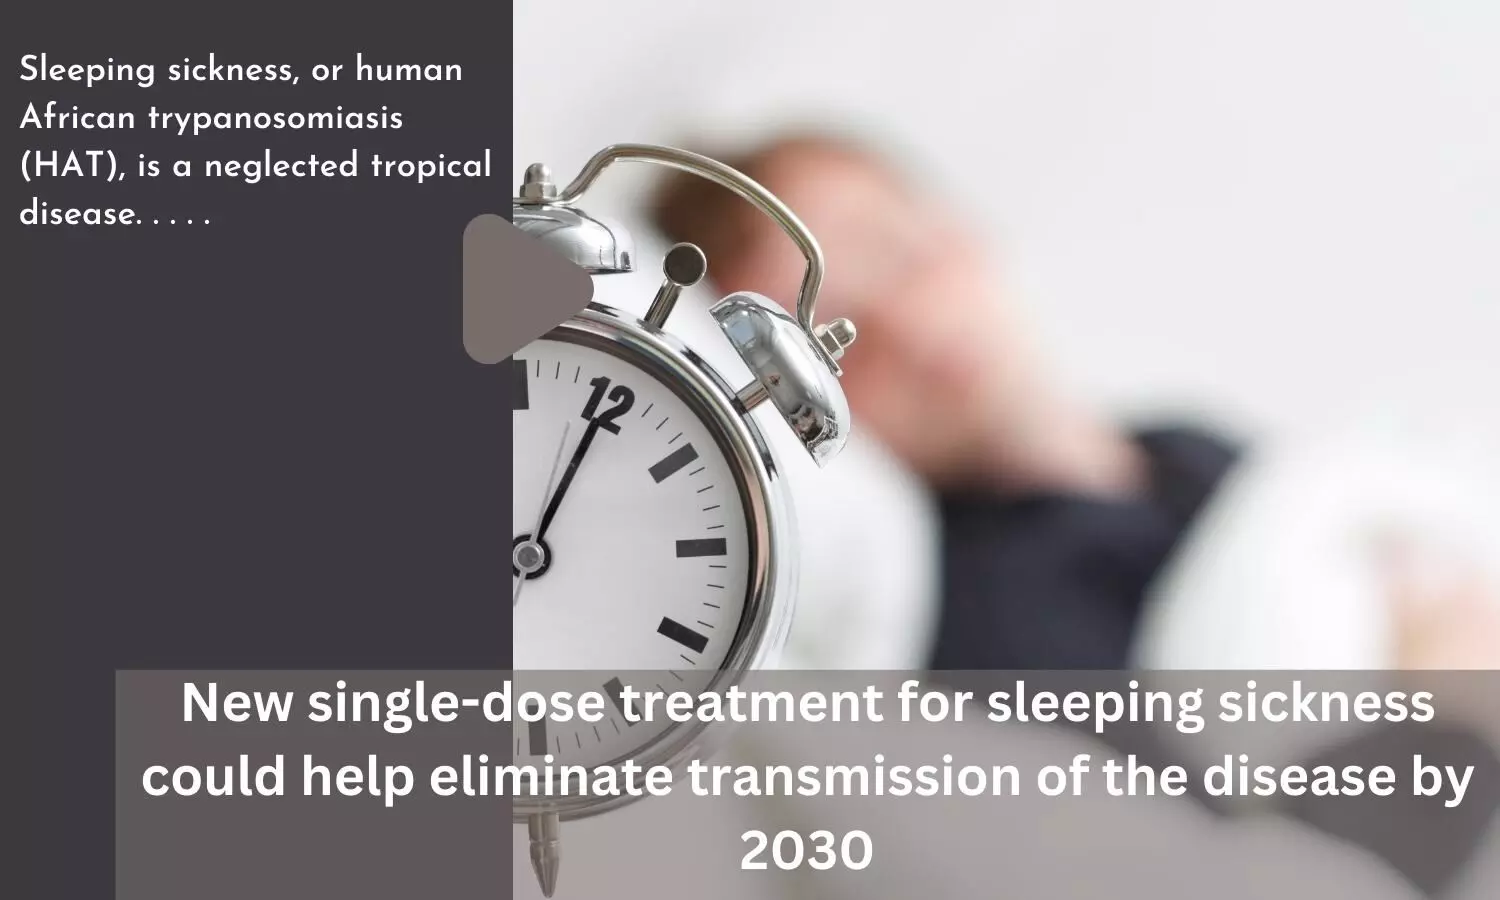 New single-dose treatment for sleeping sickness could help eliminate transmission of the disease by 2030